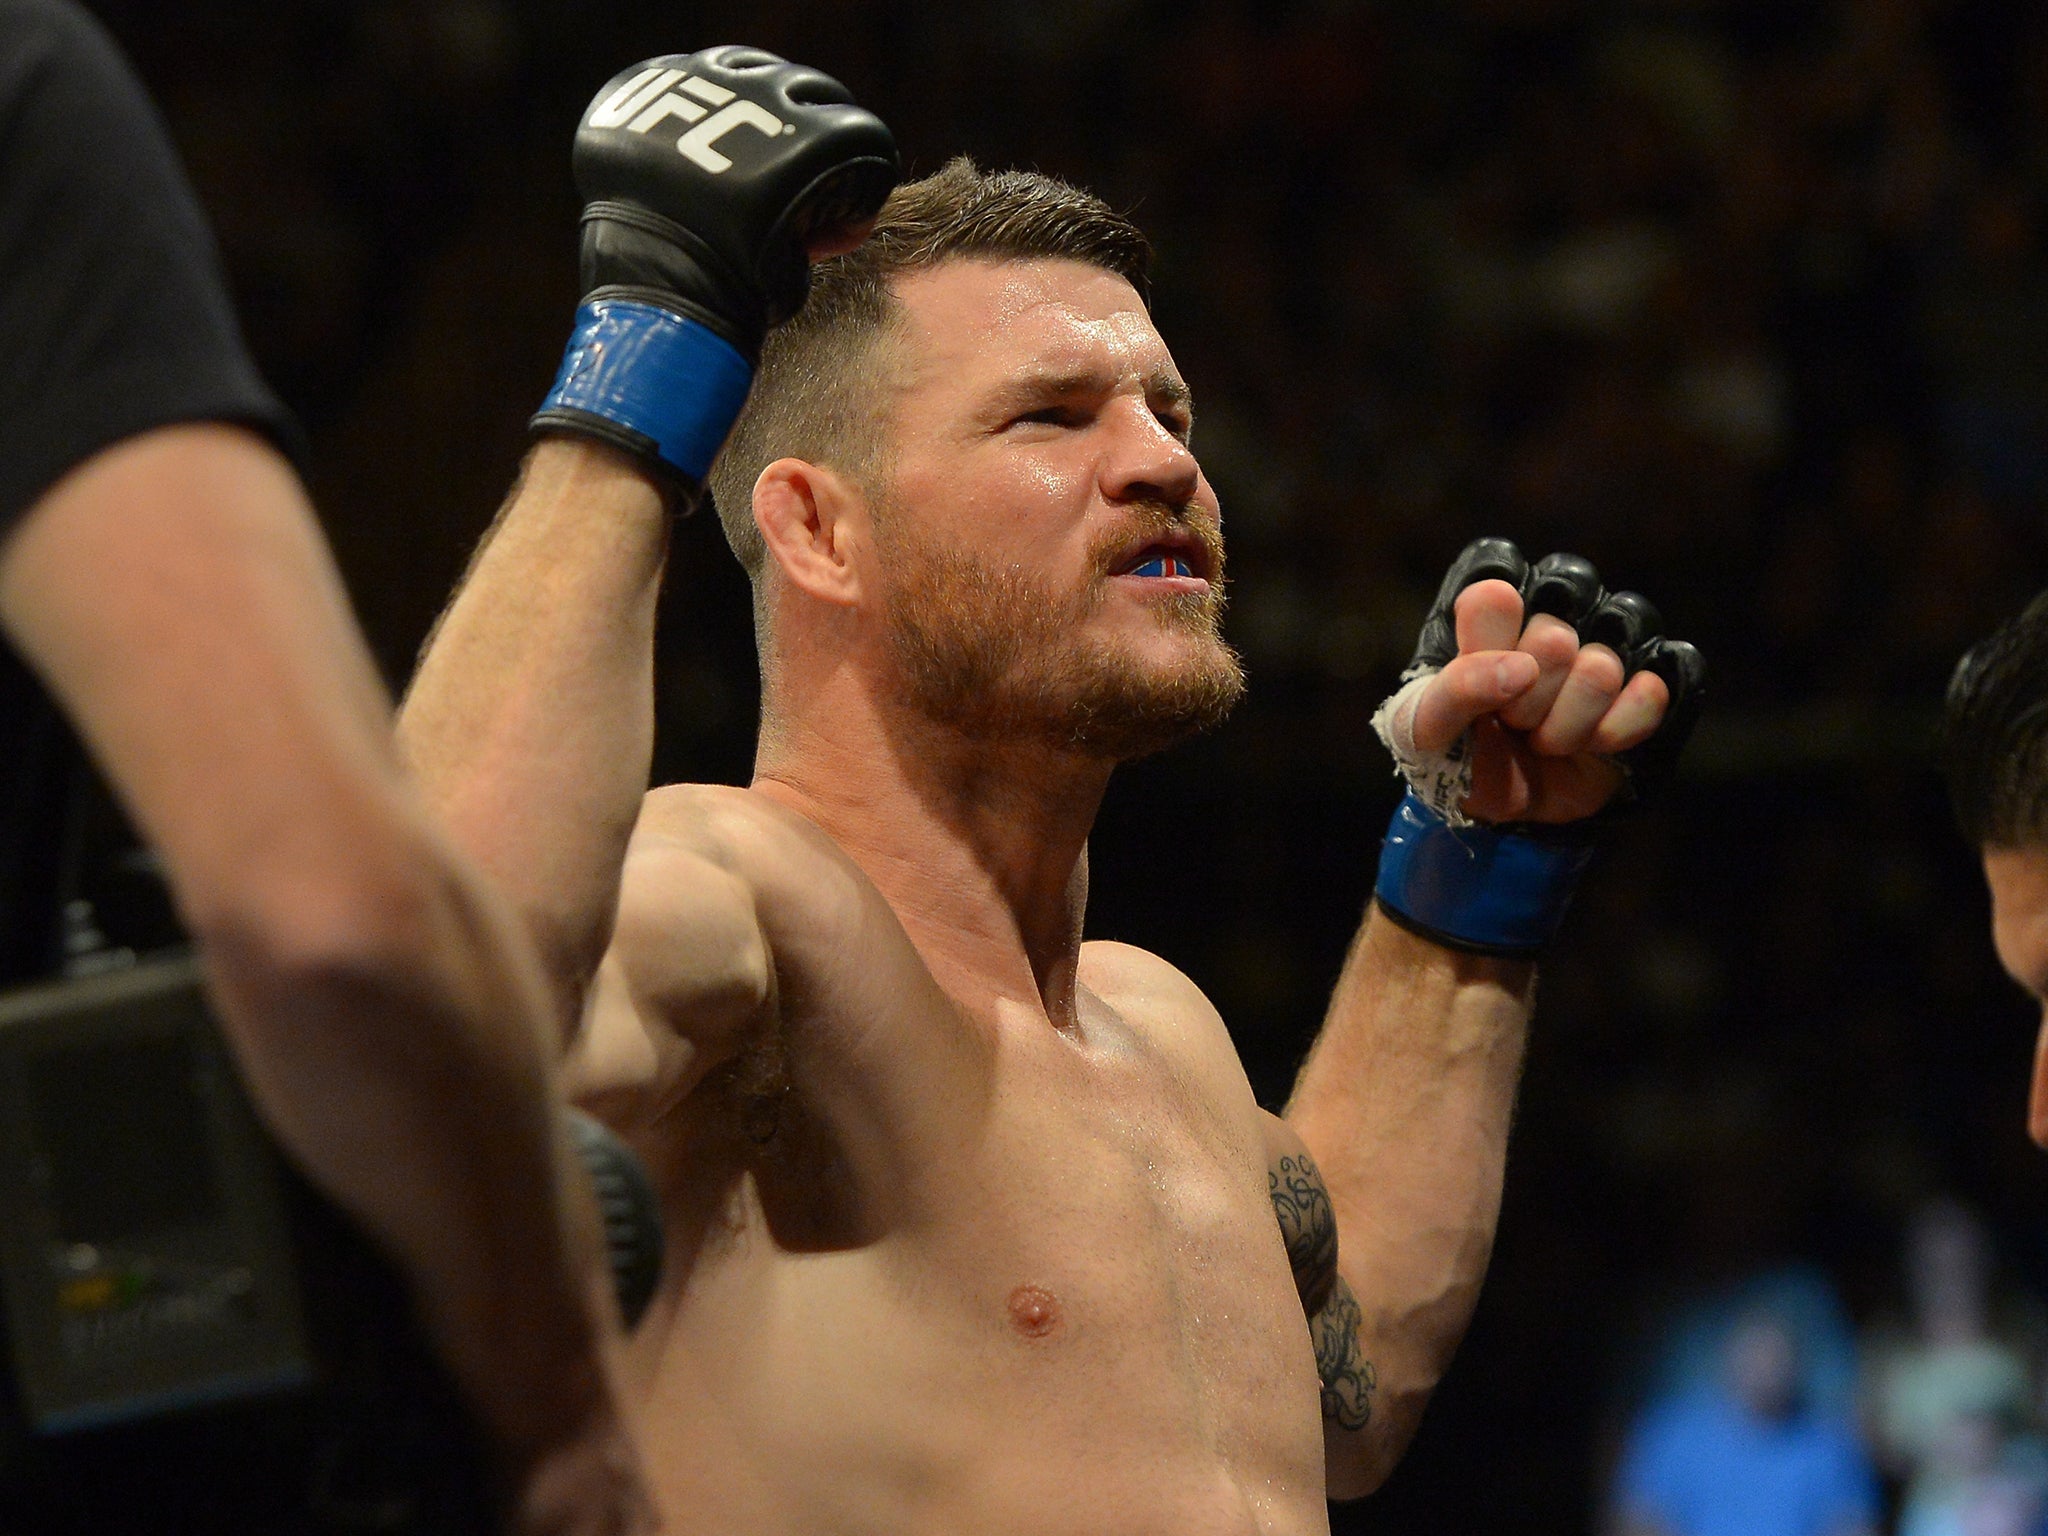 Bisping won the middleweight title by defeating Luke Rockhold at UFC 199